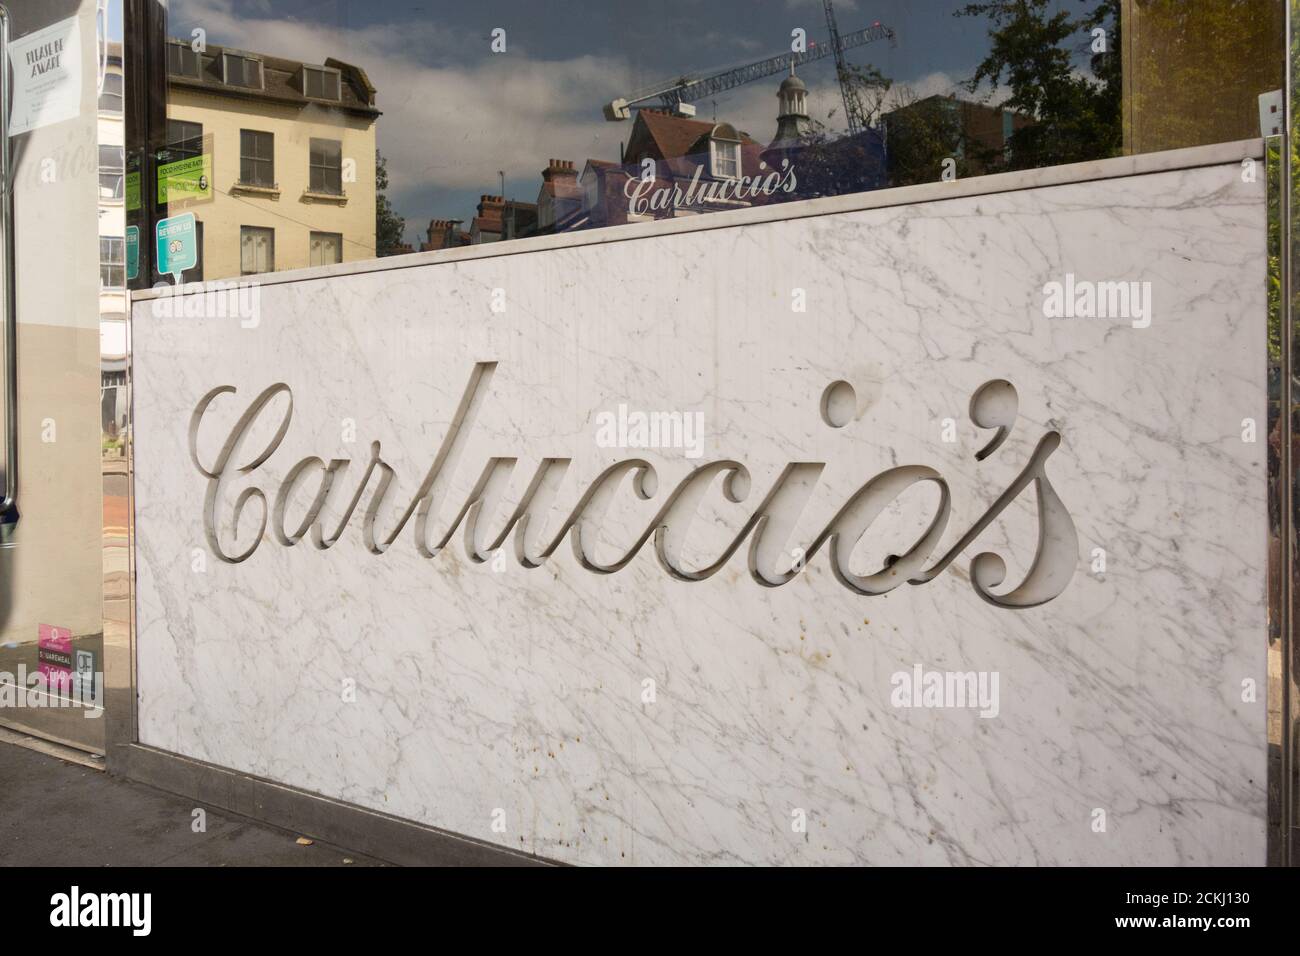 Signage outside the former Carluccio's Restaurant on The Green, Ealing, London, W5, U.K. Stock Photo